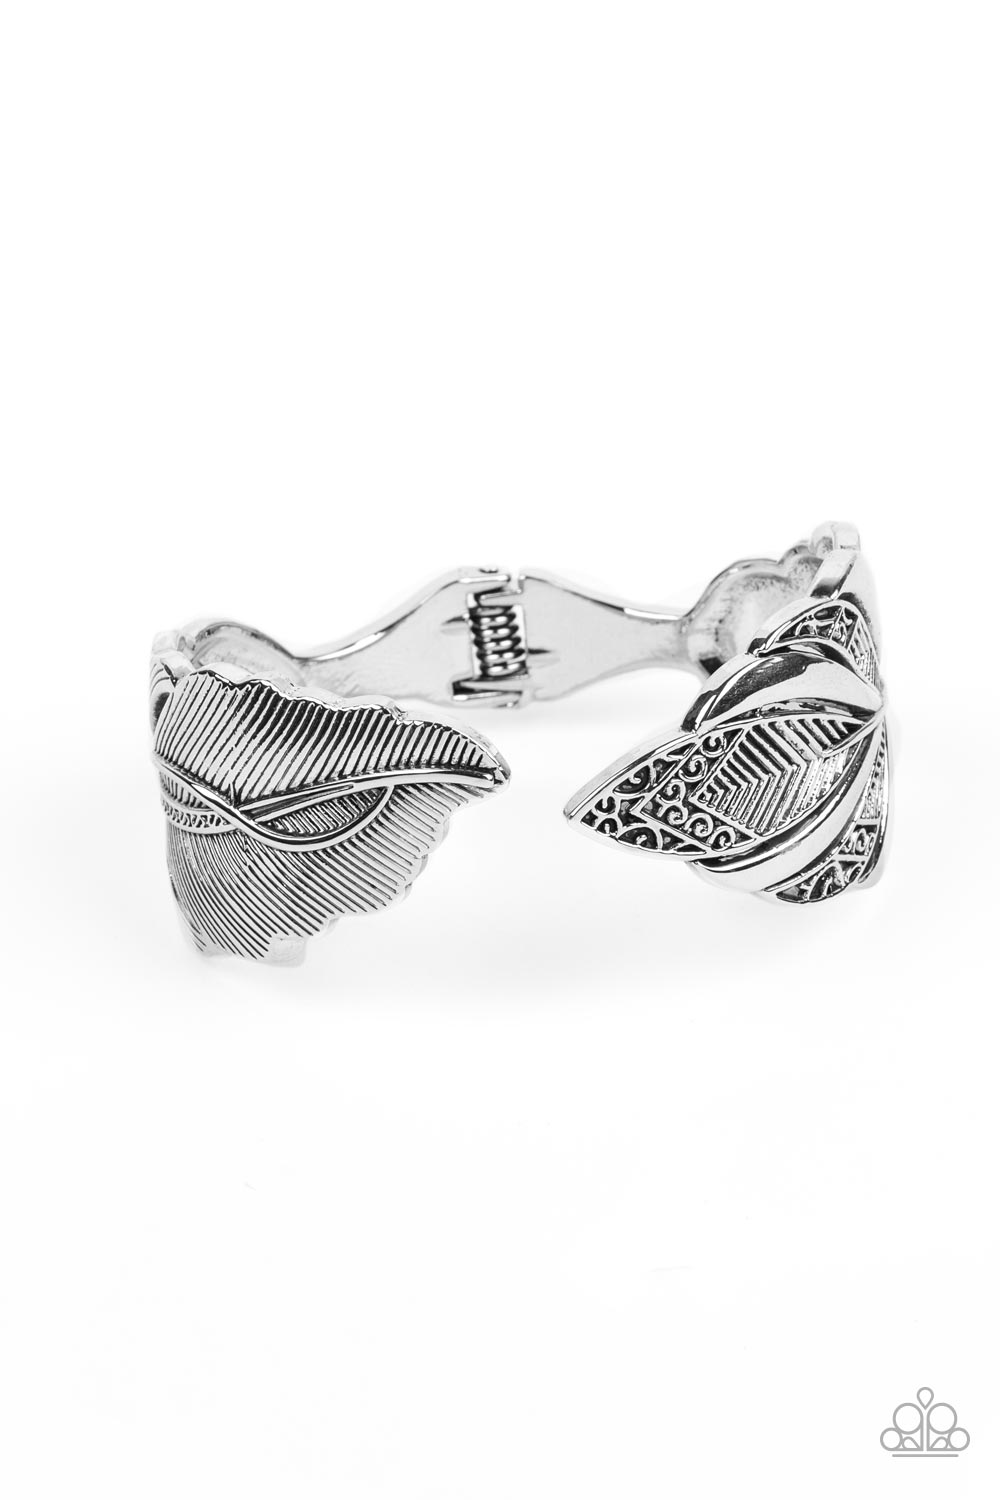 American Art Silver Feather Bracelet - Paparazzi Accessories- lightbox - CarasShop.com - $5 Jewelry by Cara Jewels